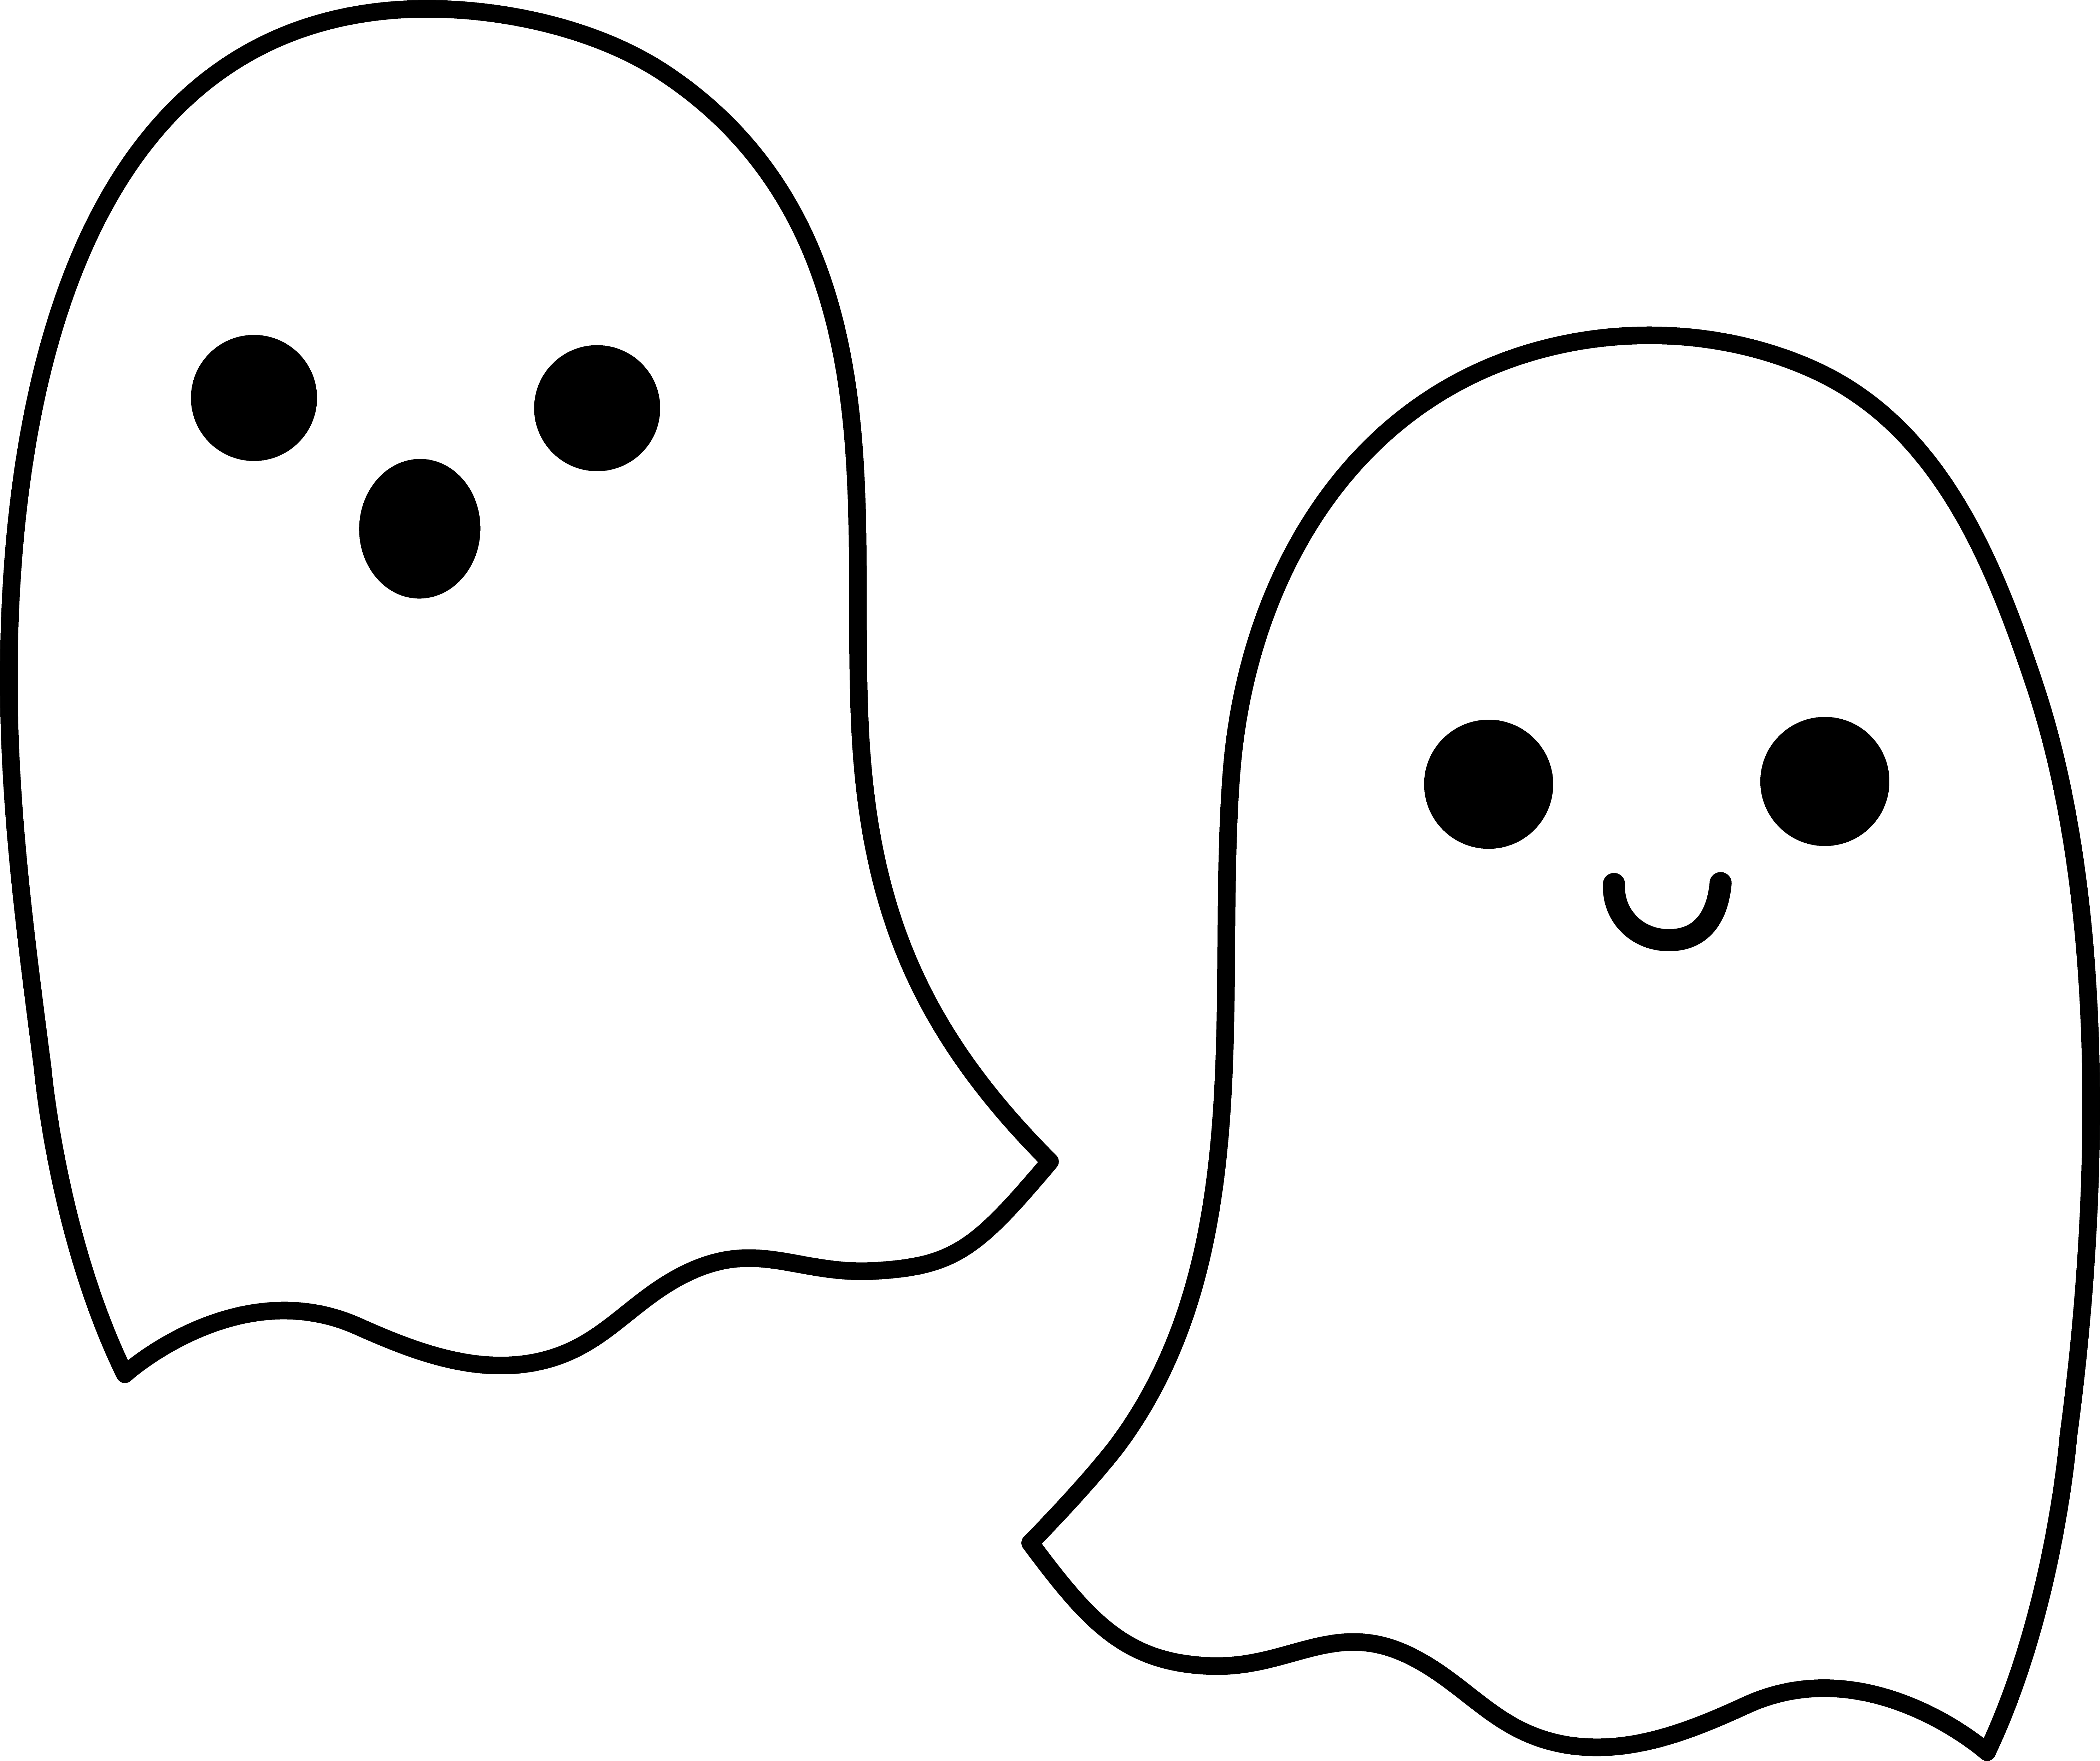 ghost clipart for kids